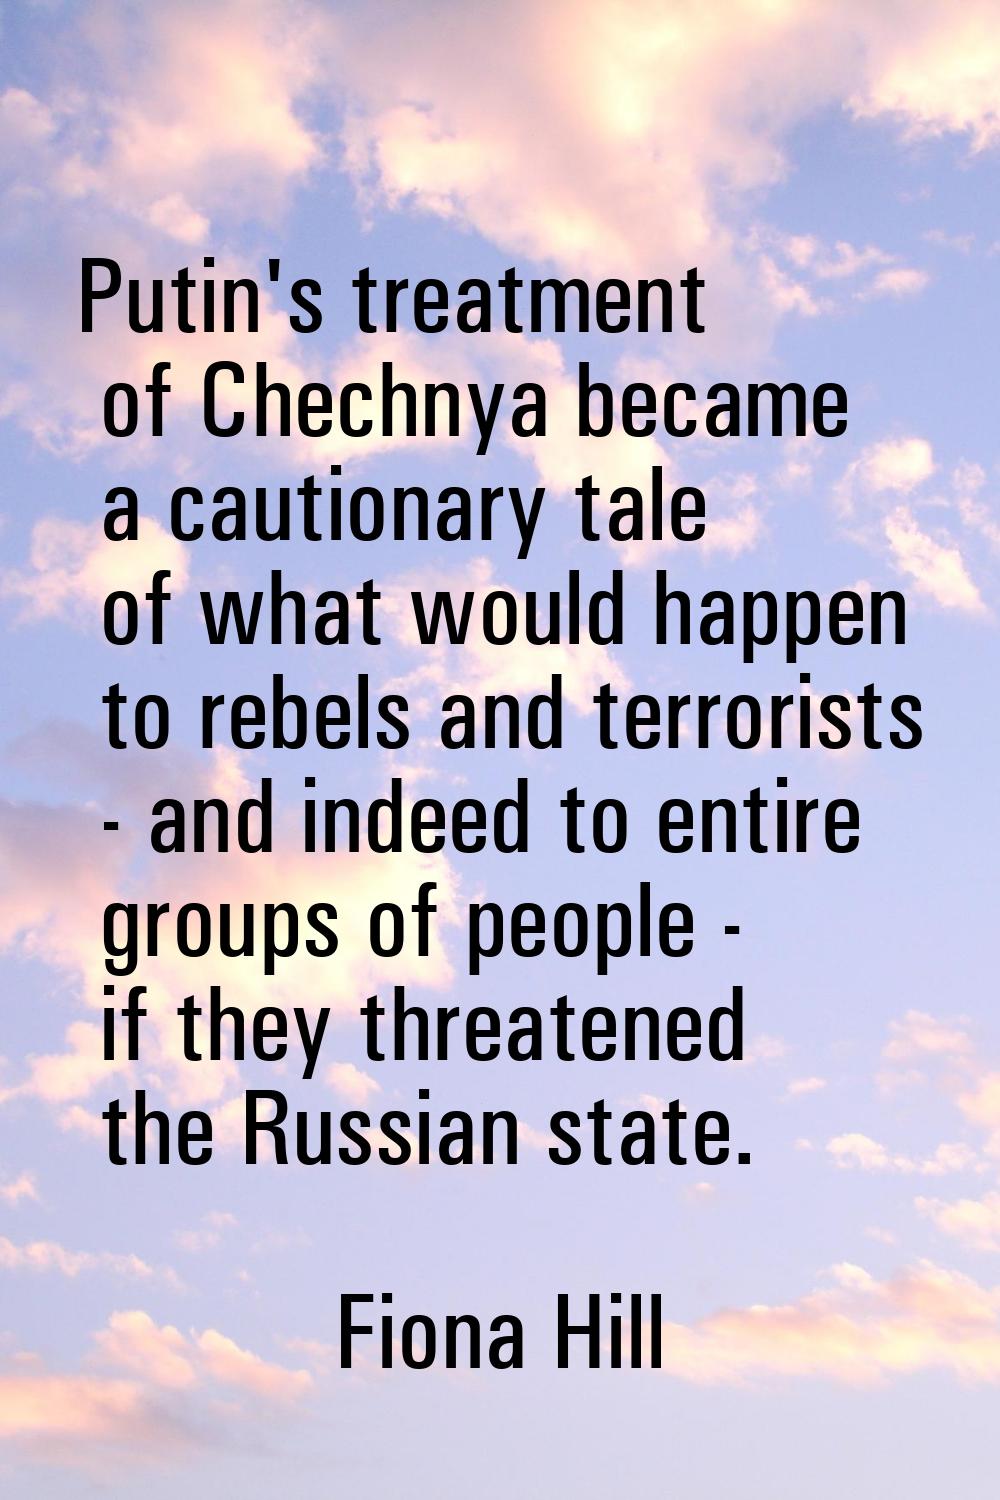 Putin's treatment of Chechnya became a cautionary tale of what would happen to rebels and terrorist